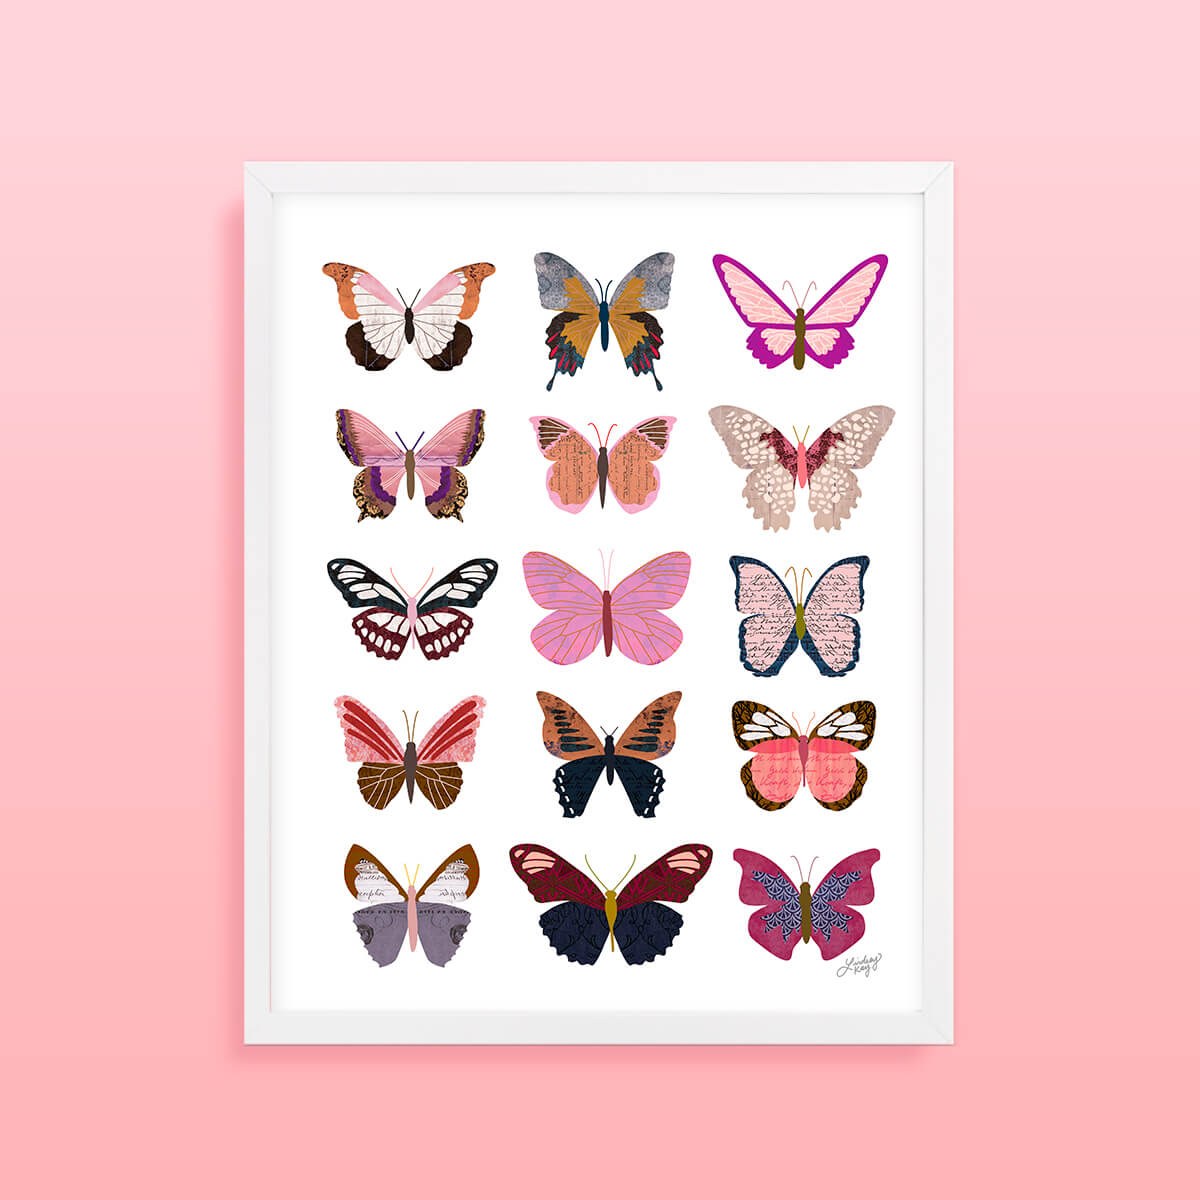 Pink Butterflies Collage Illustration Art Print for your home decor.